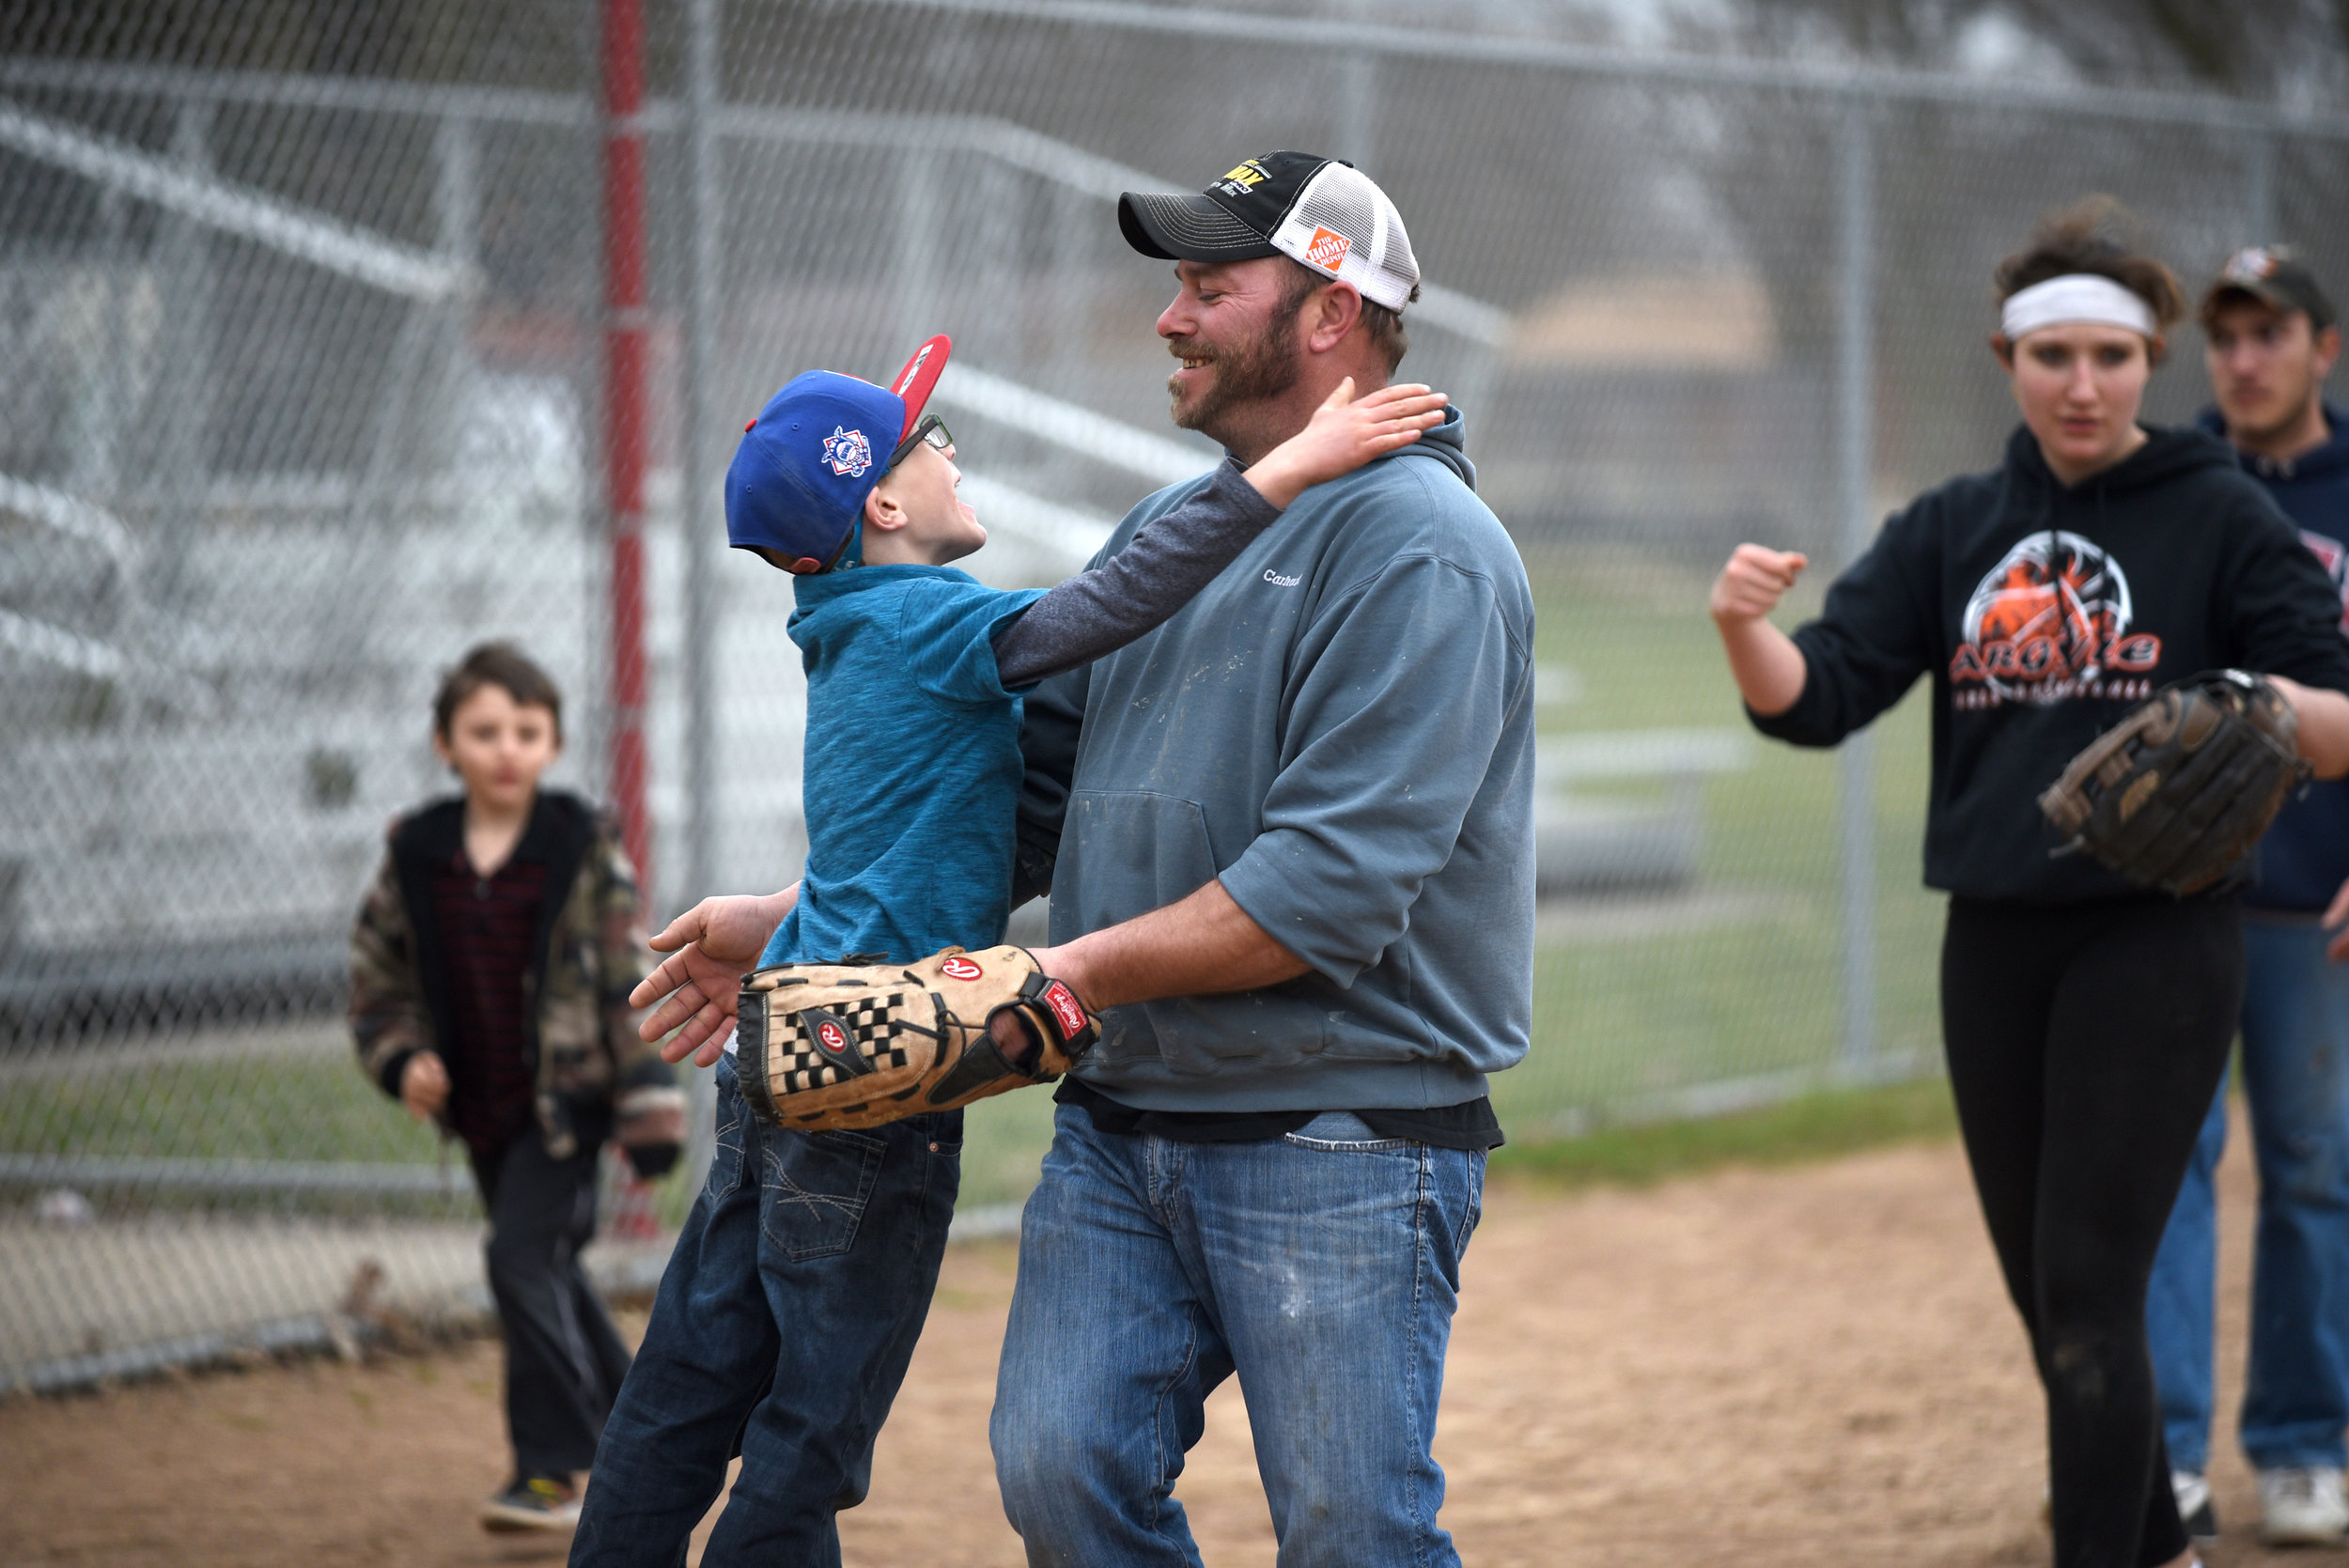  Mikey Helfvogt, 6, hugs his dad Keith Helfvogt, of Argyle, after a family game of softball after church at Twining Park April 2, 2017. The Helfvogt and Yaun families play almost every other Sunday after church. Their family is big enough for two tea